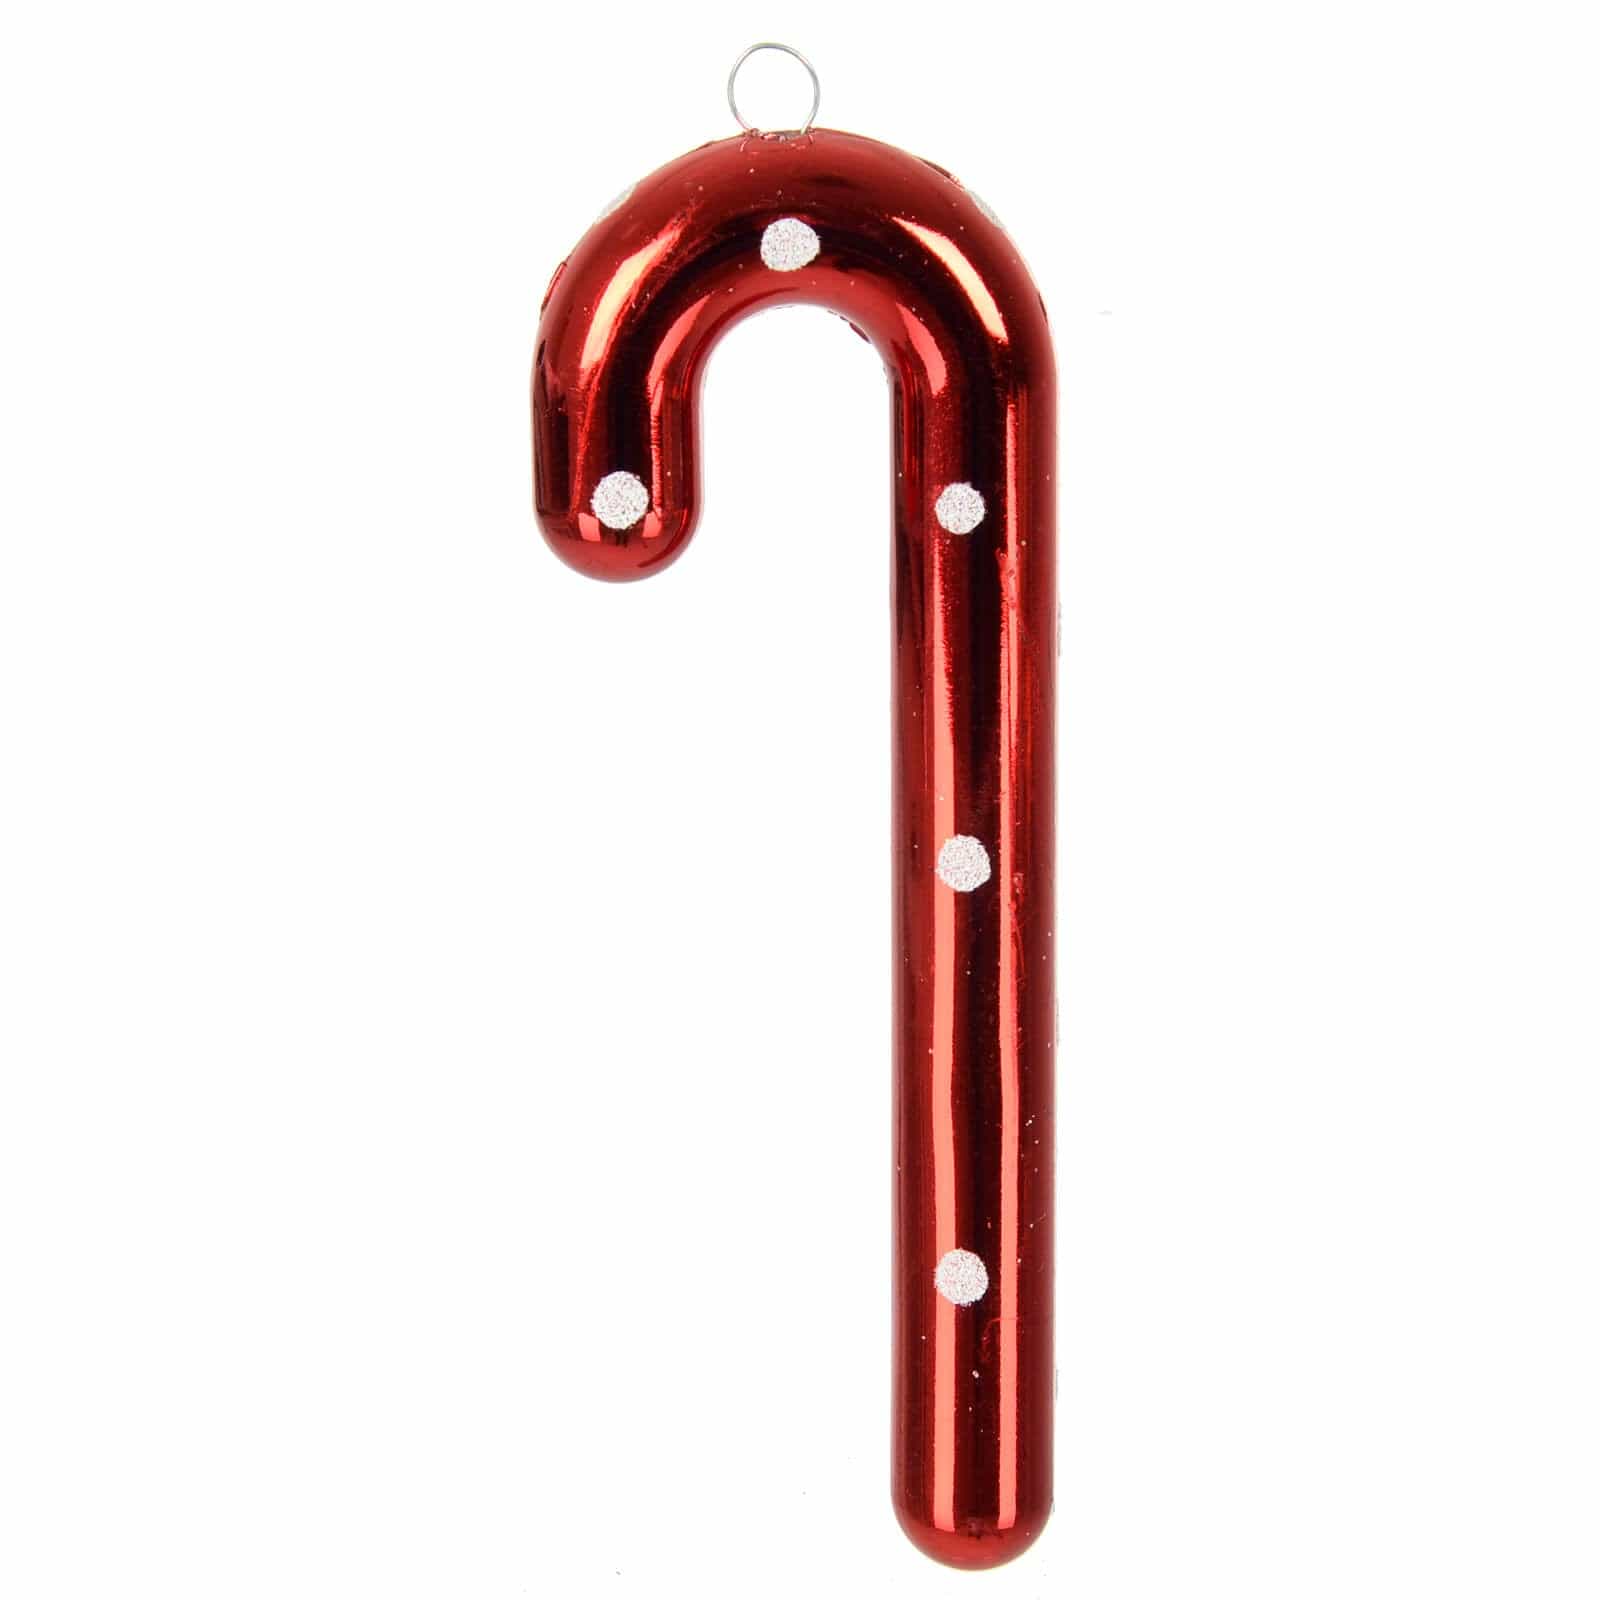 red glossy candy cane shaped decoration feature glitter polka dot pattern and silver wire hanging loop